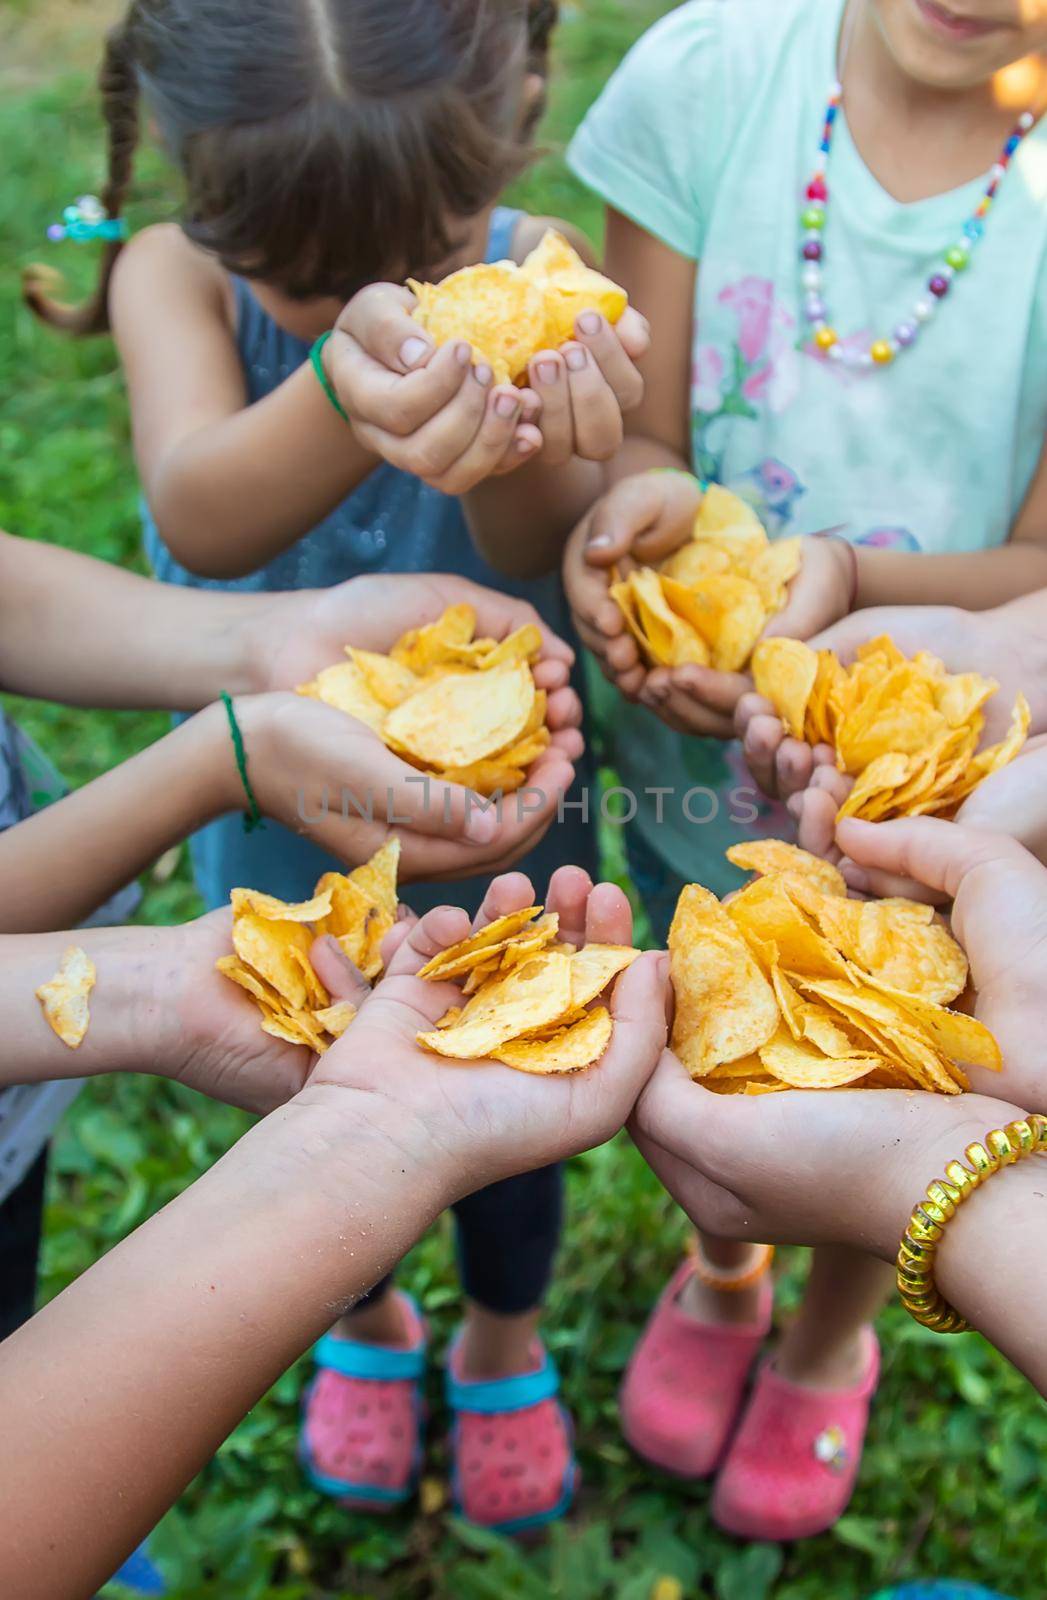 Children are holding chips in their hands. Selective focus. people.